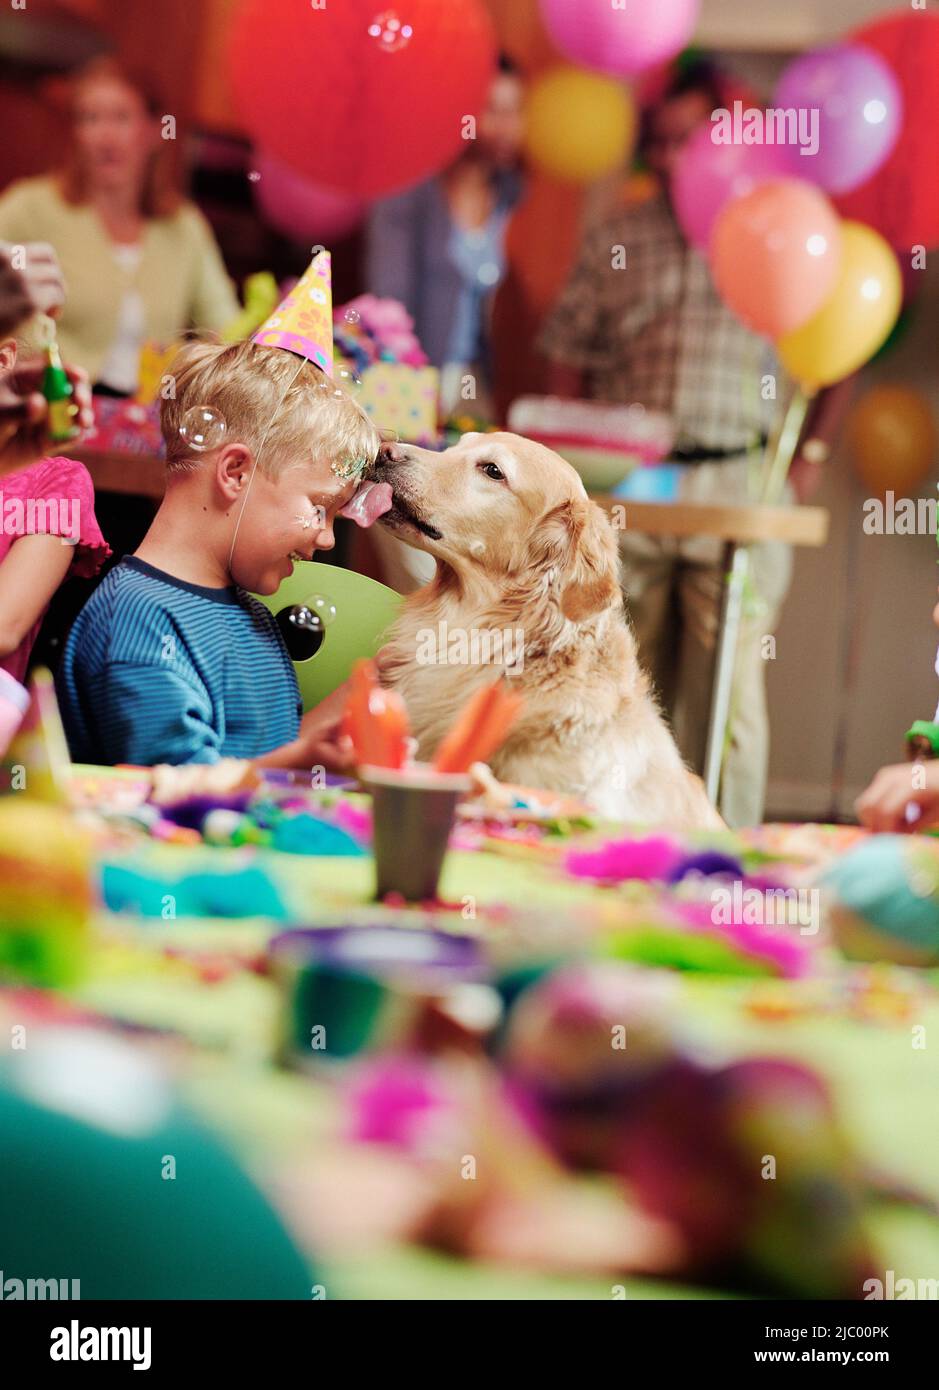 Young boy at birthday party with dog licking his face Stock Photo